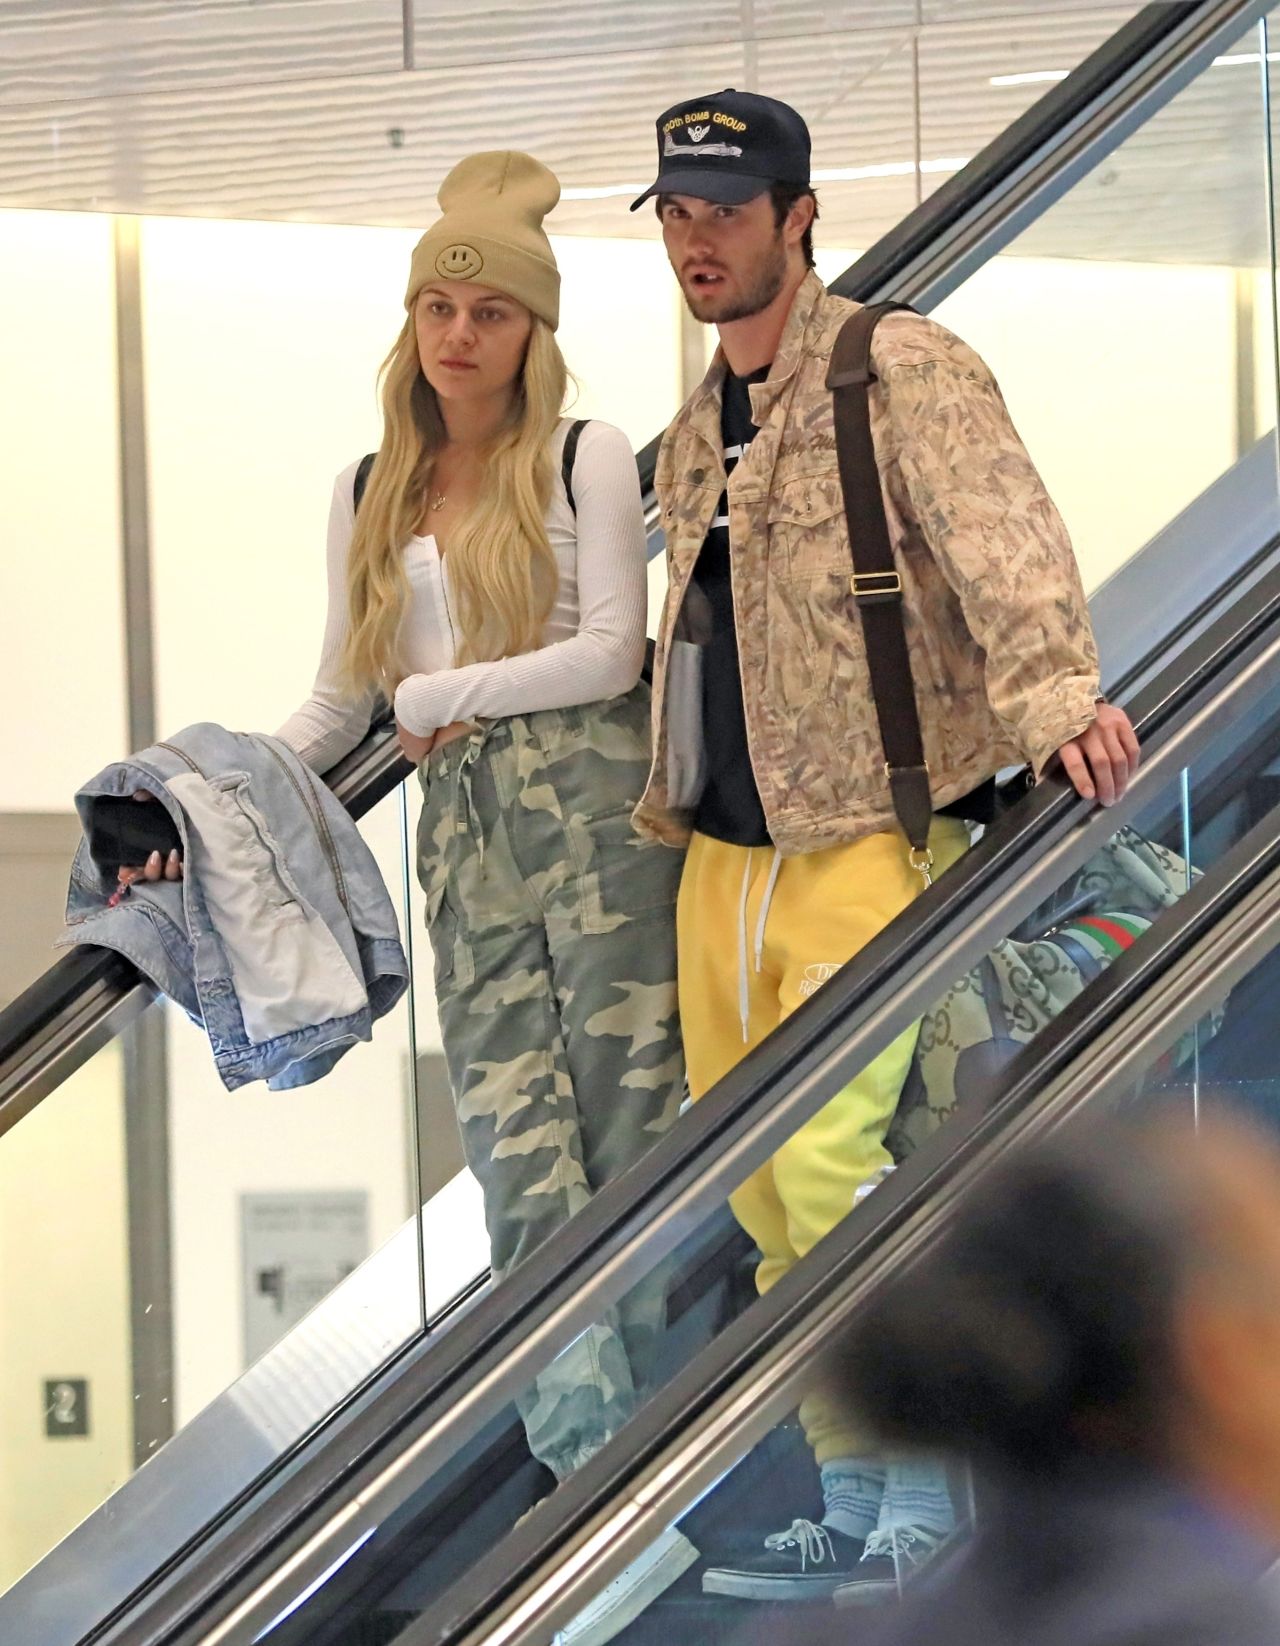 Kelsea Ballerini and Chris Stokes at LAX Airport, New Celebrity Couple?